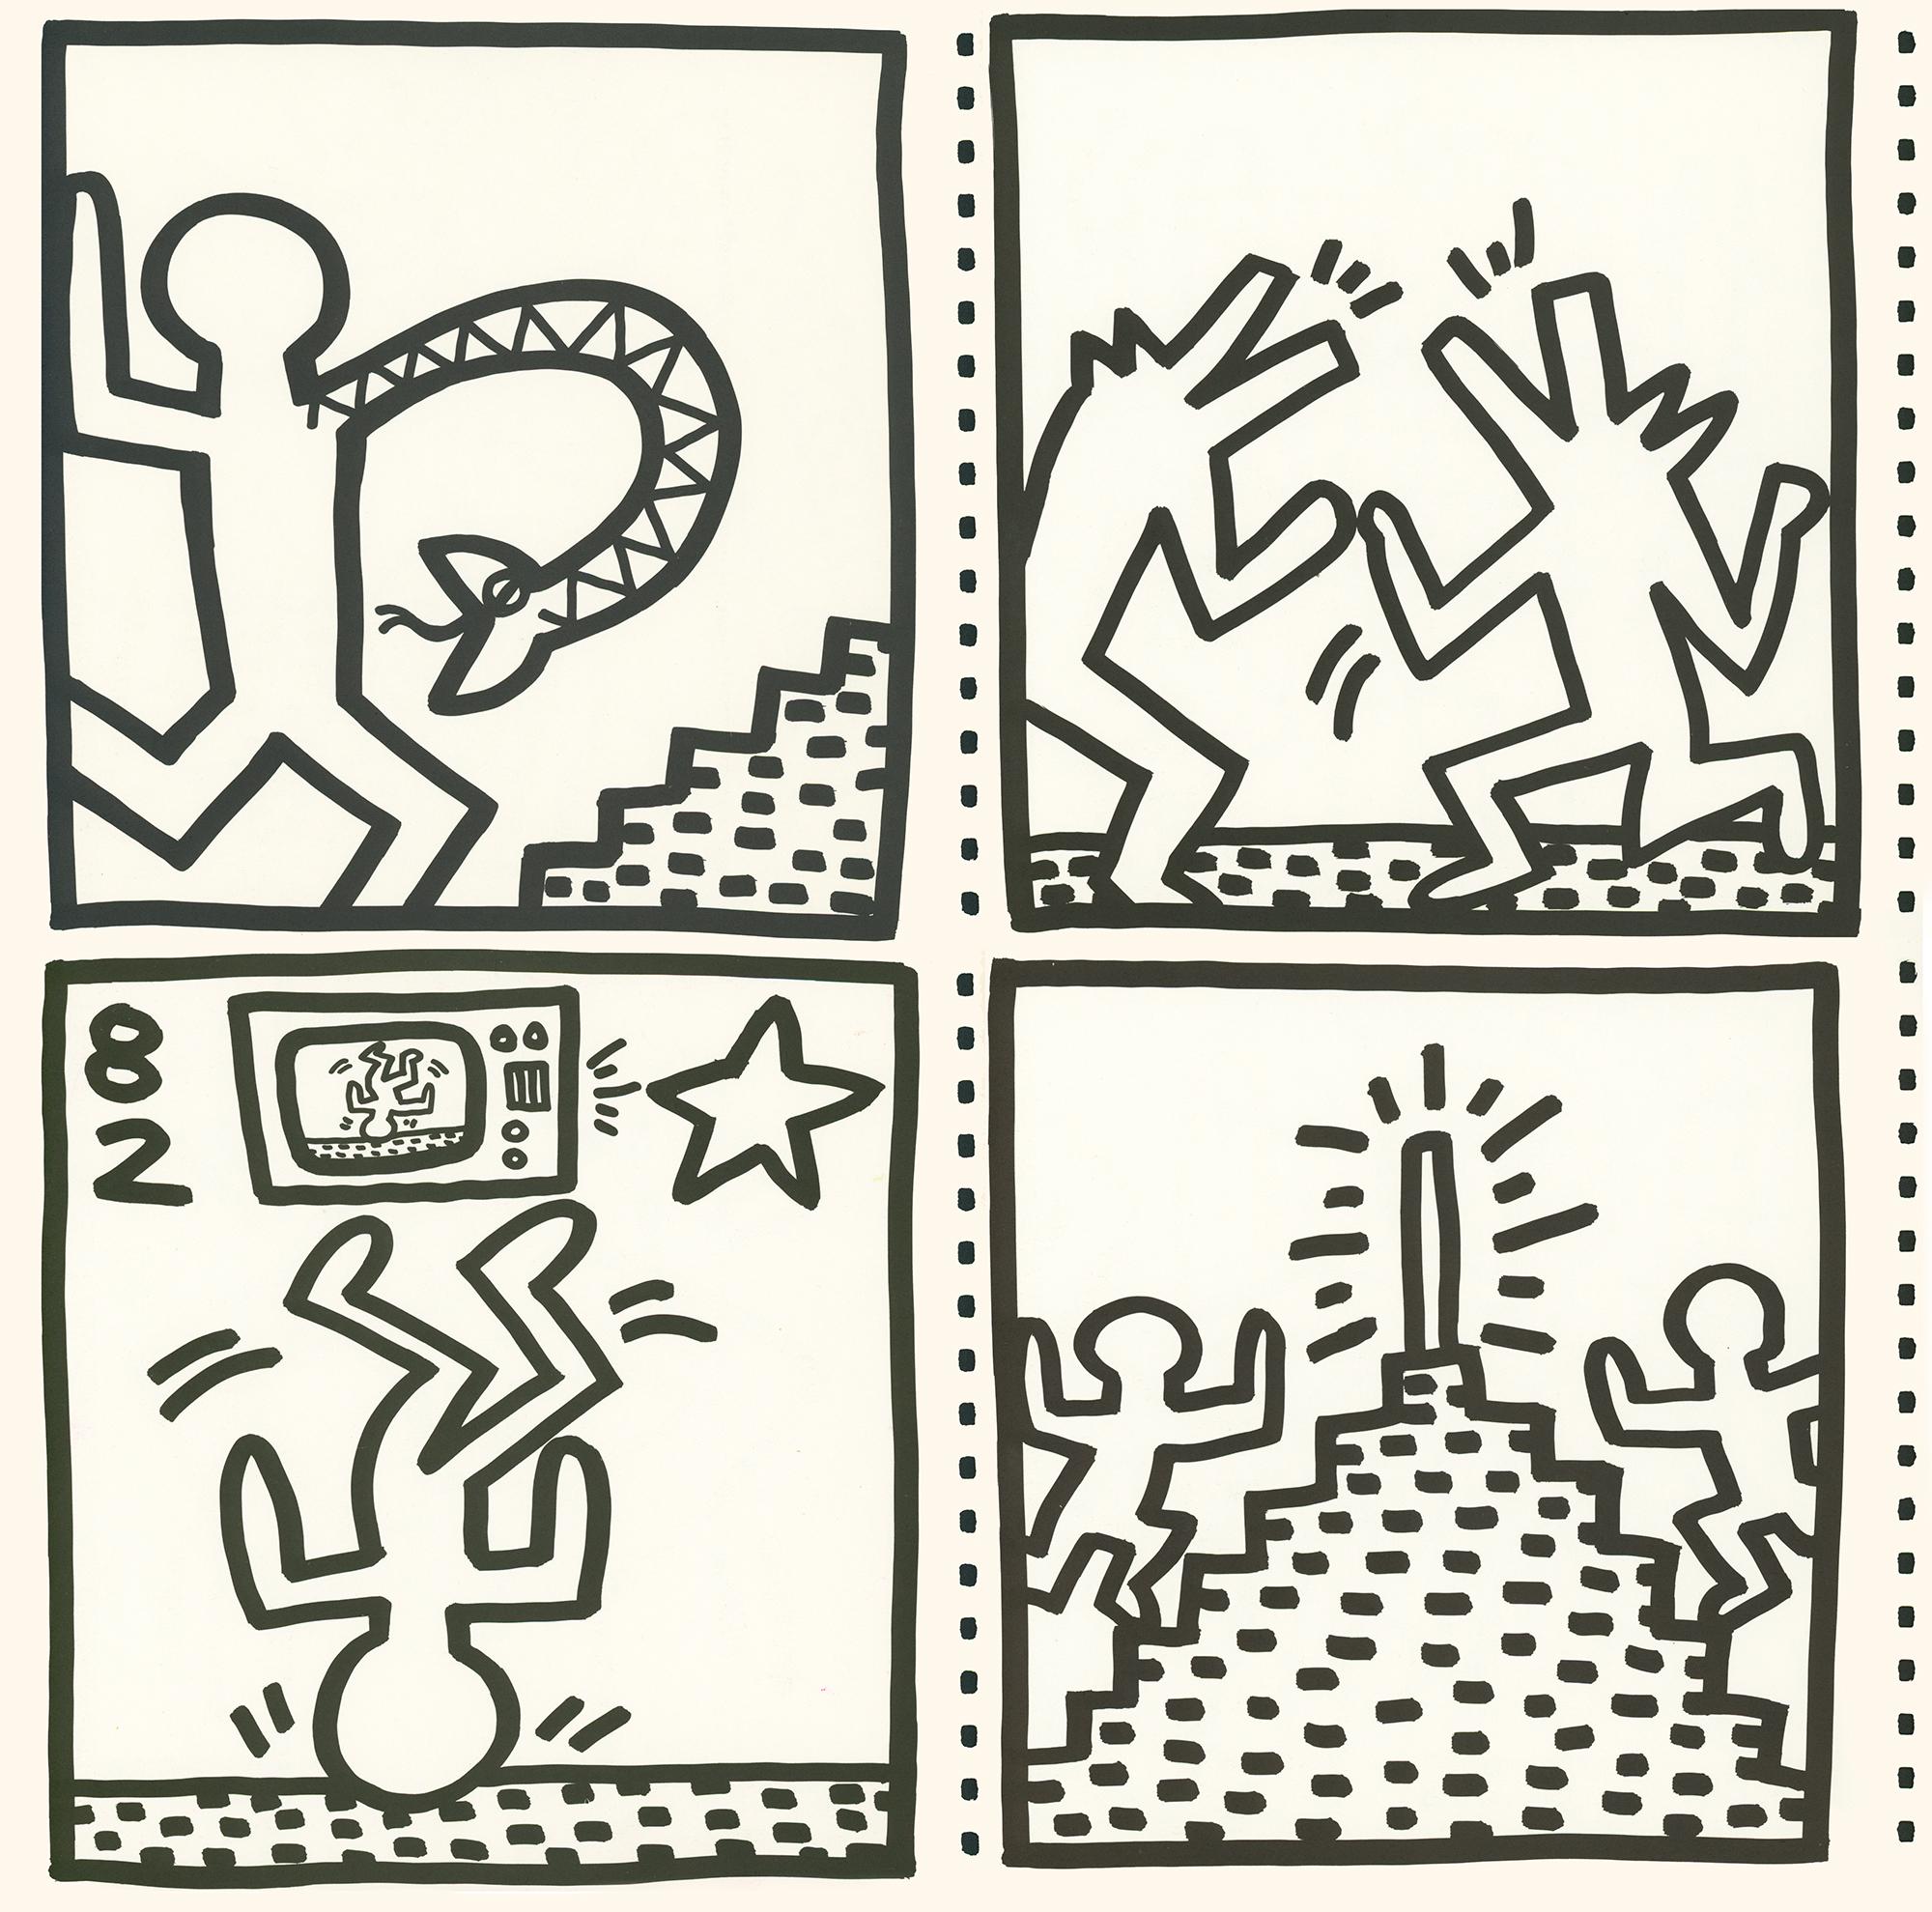 Keith Haring lithographic sheets 1982 (set of 4 works)  - Print by (after) Keith Haring